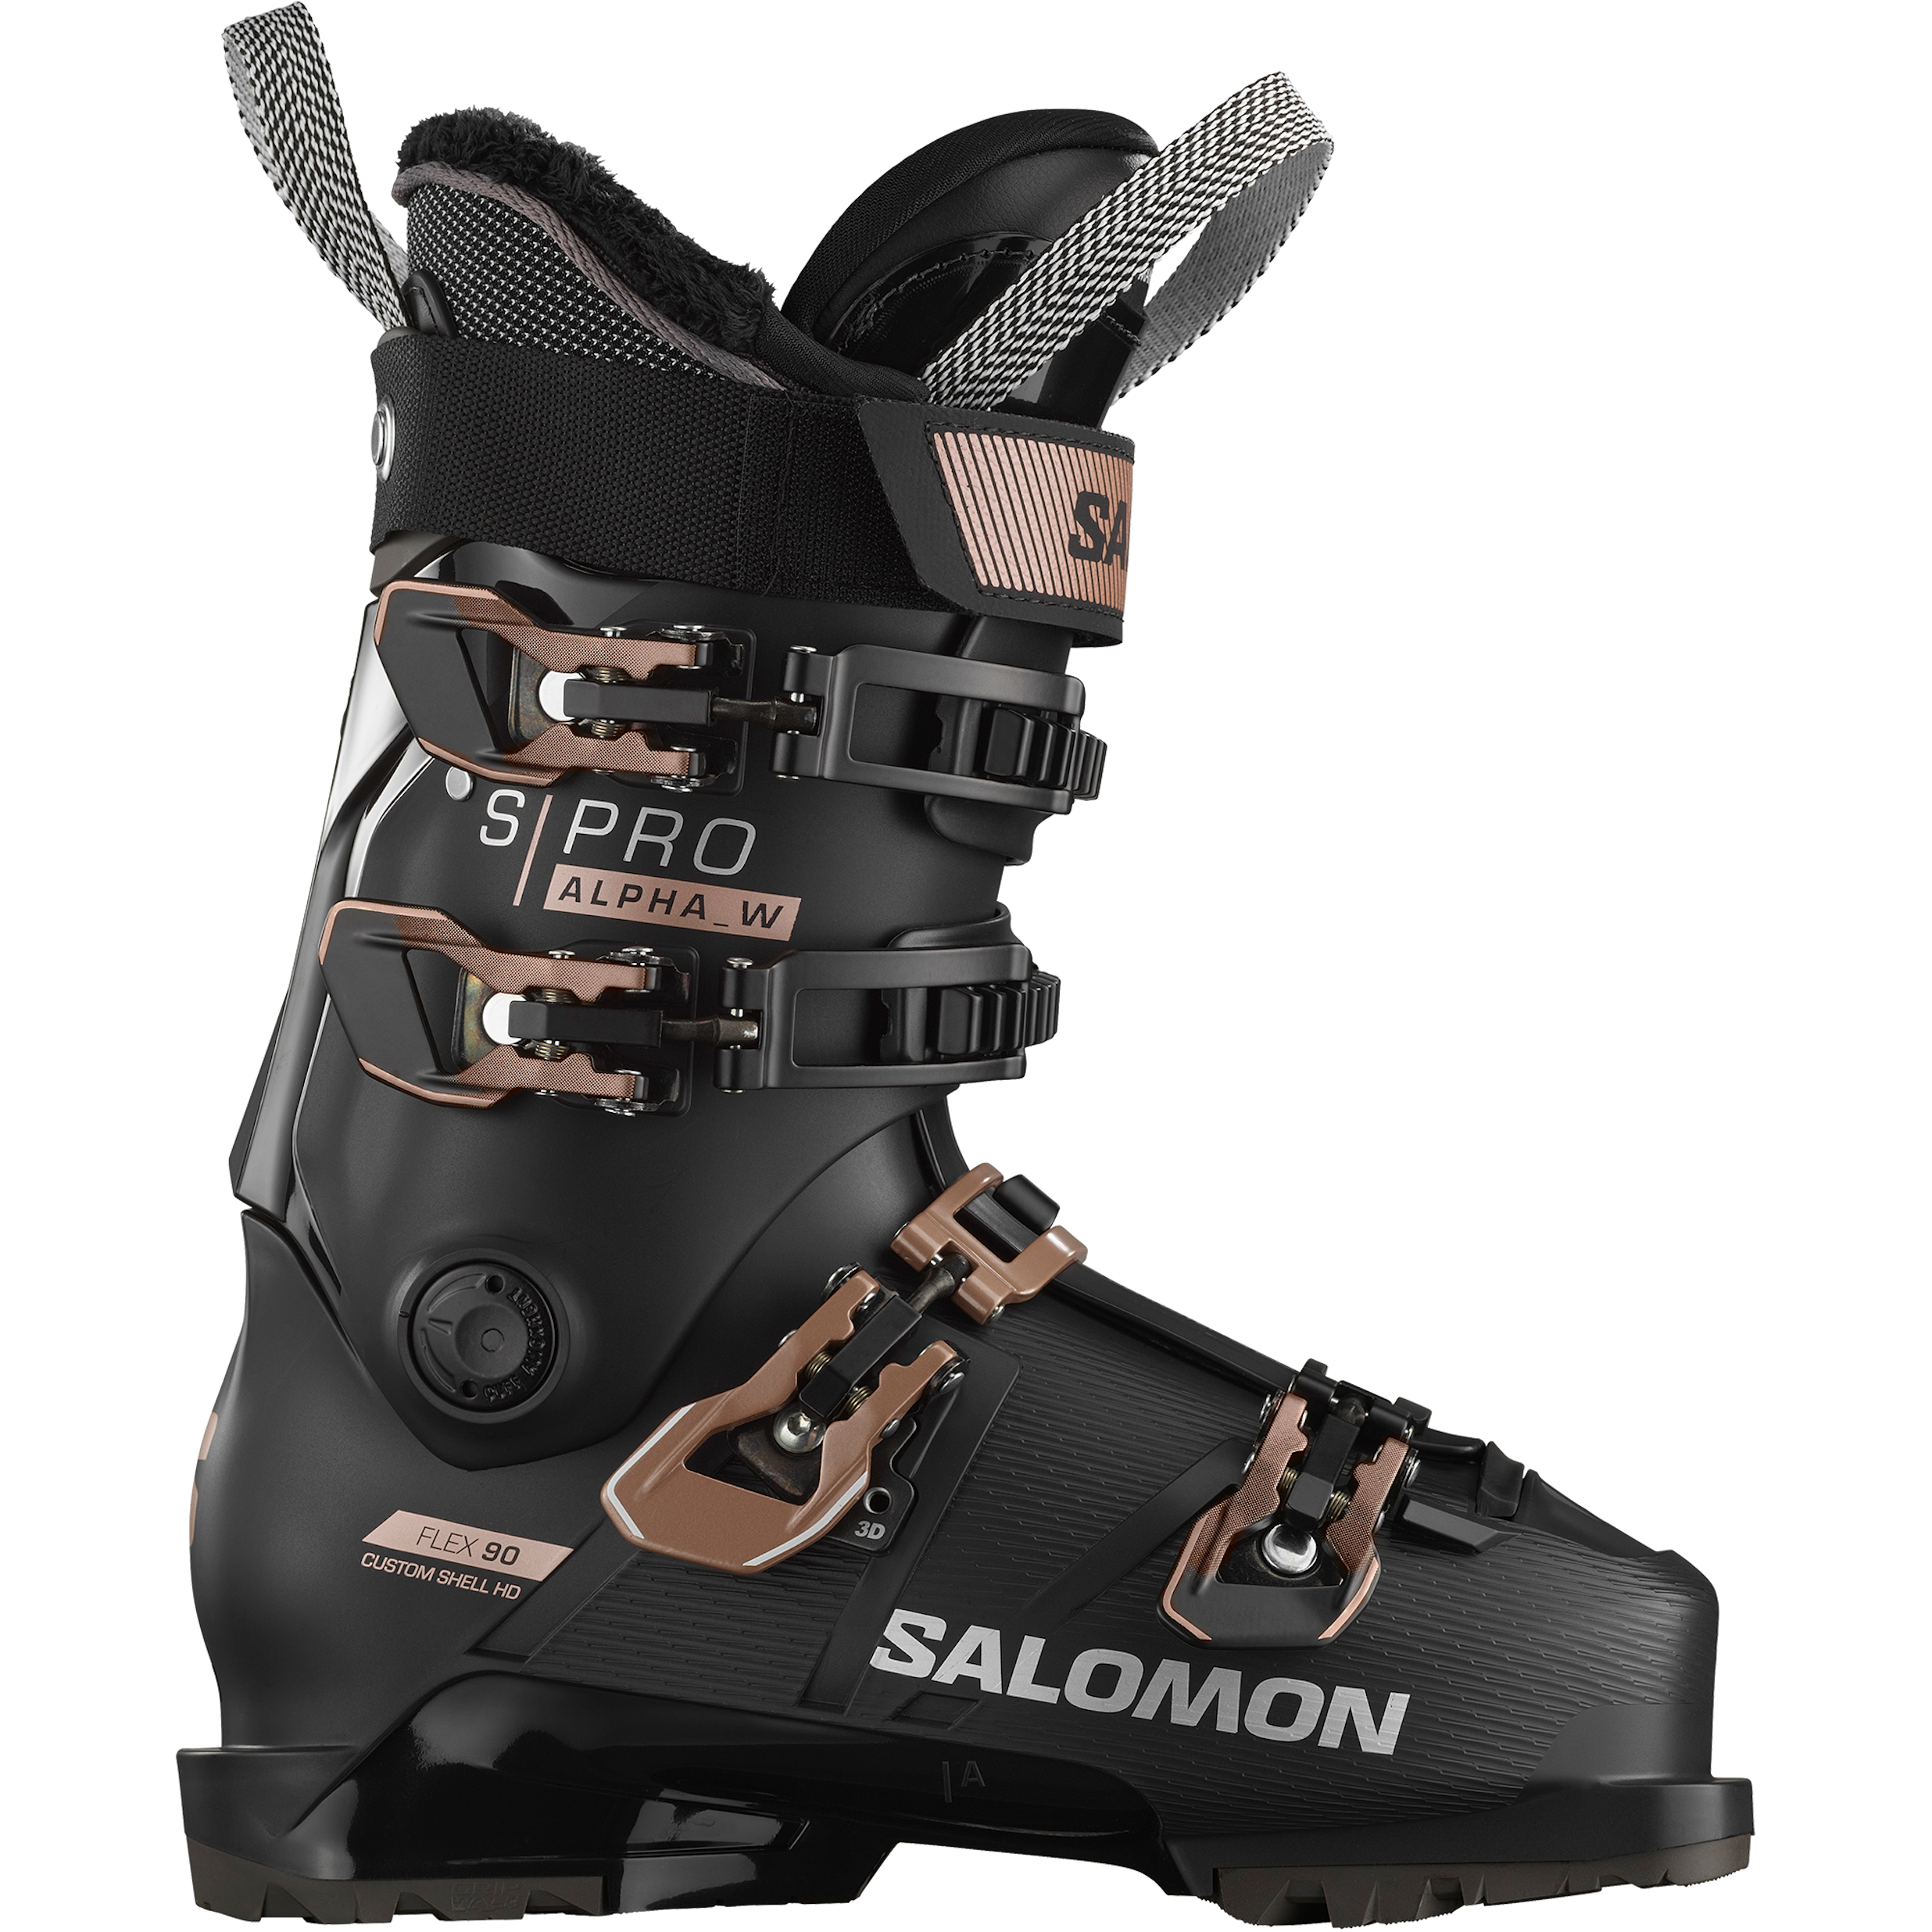 Women's Salomon S/PRO Alpha 90 ski boot, all black with gold buckles and accents.